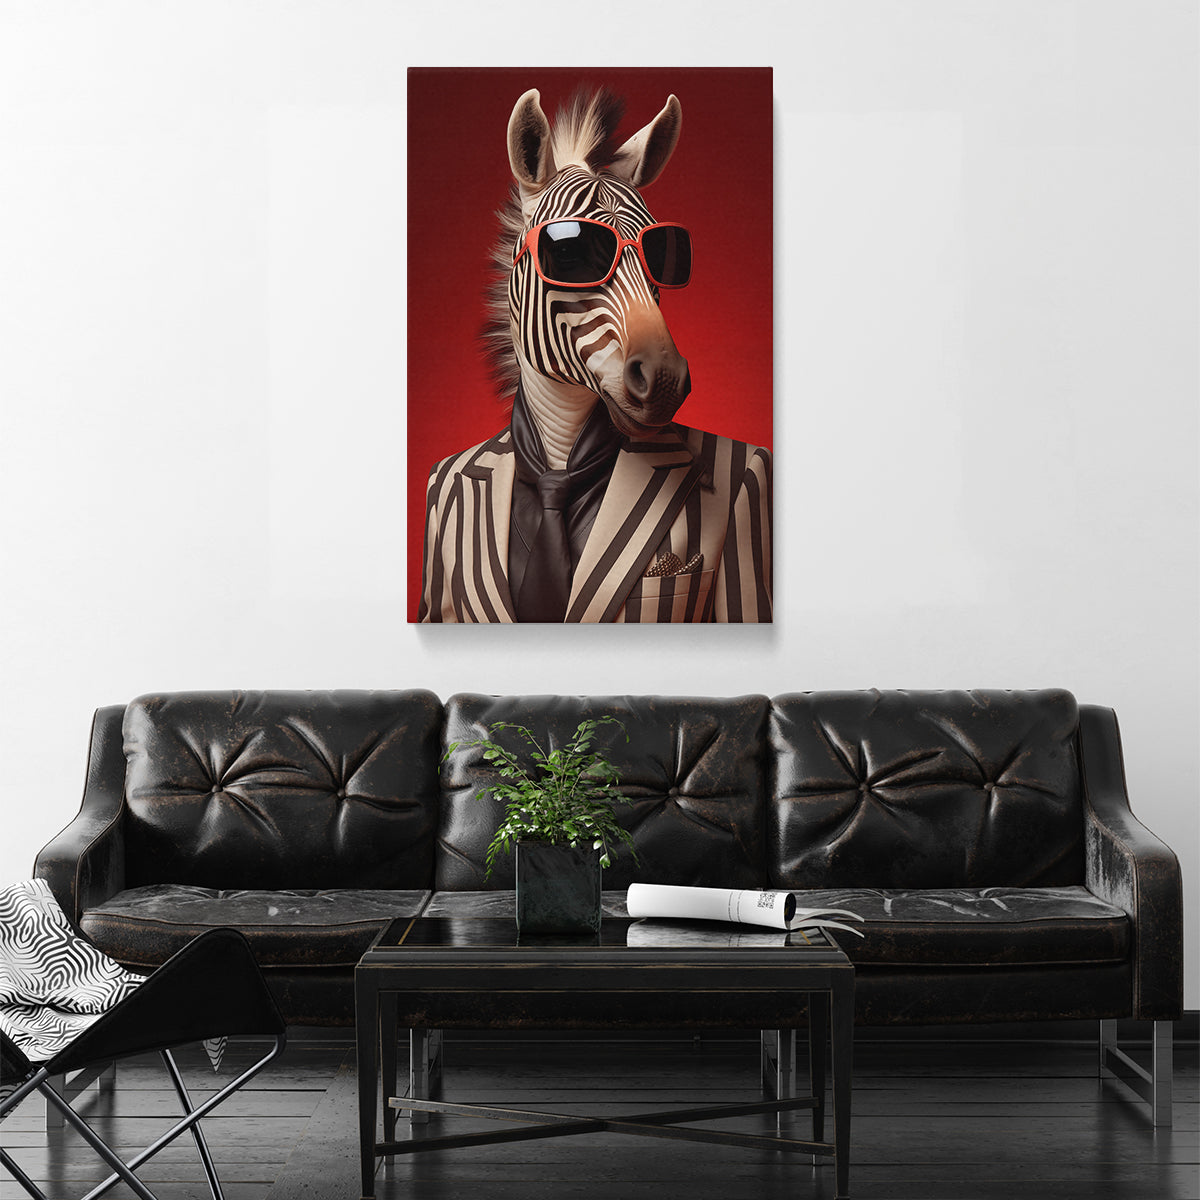 Chic Zebra in Pinstripe Suit, Quirky Animal Art Abstract Art Print Artesty   